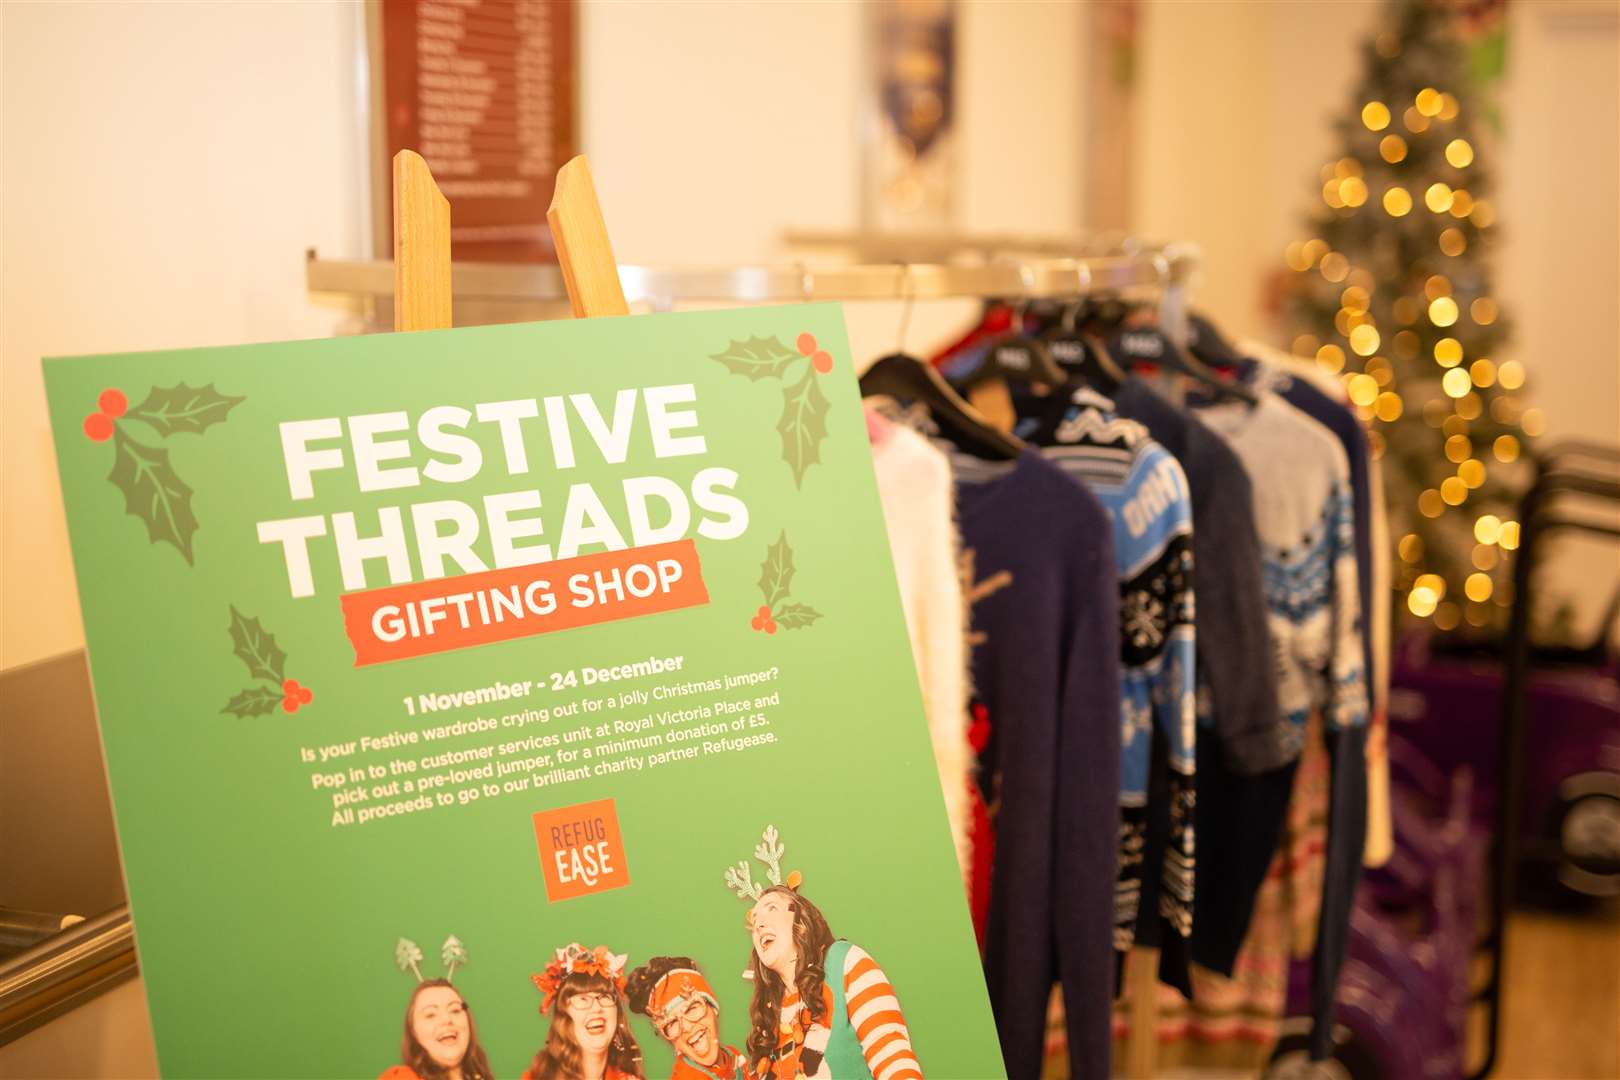 Festive Threads gifting shop in Royal Victoria Place in Tunbridge Wells. Picture: Georgina Edwards